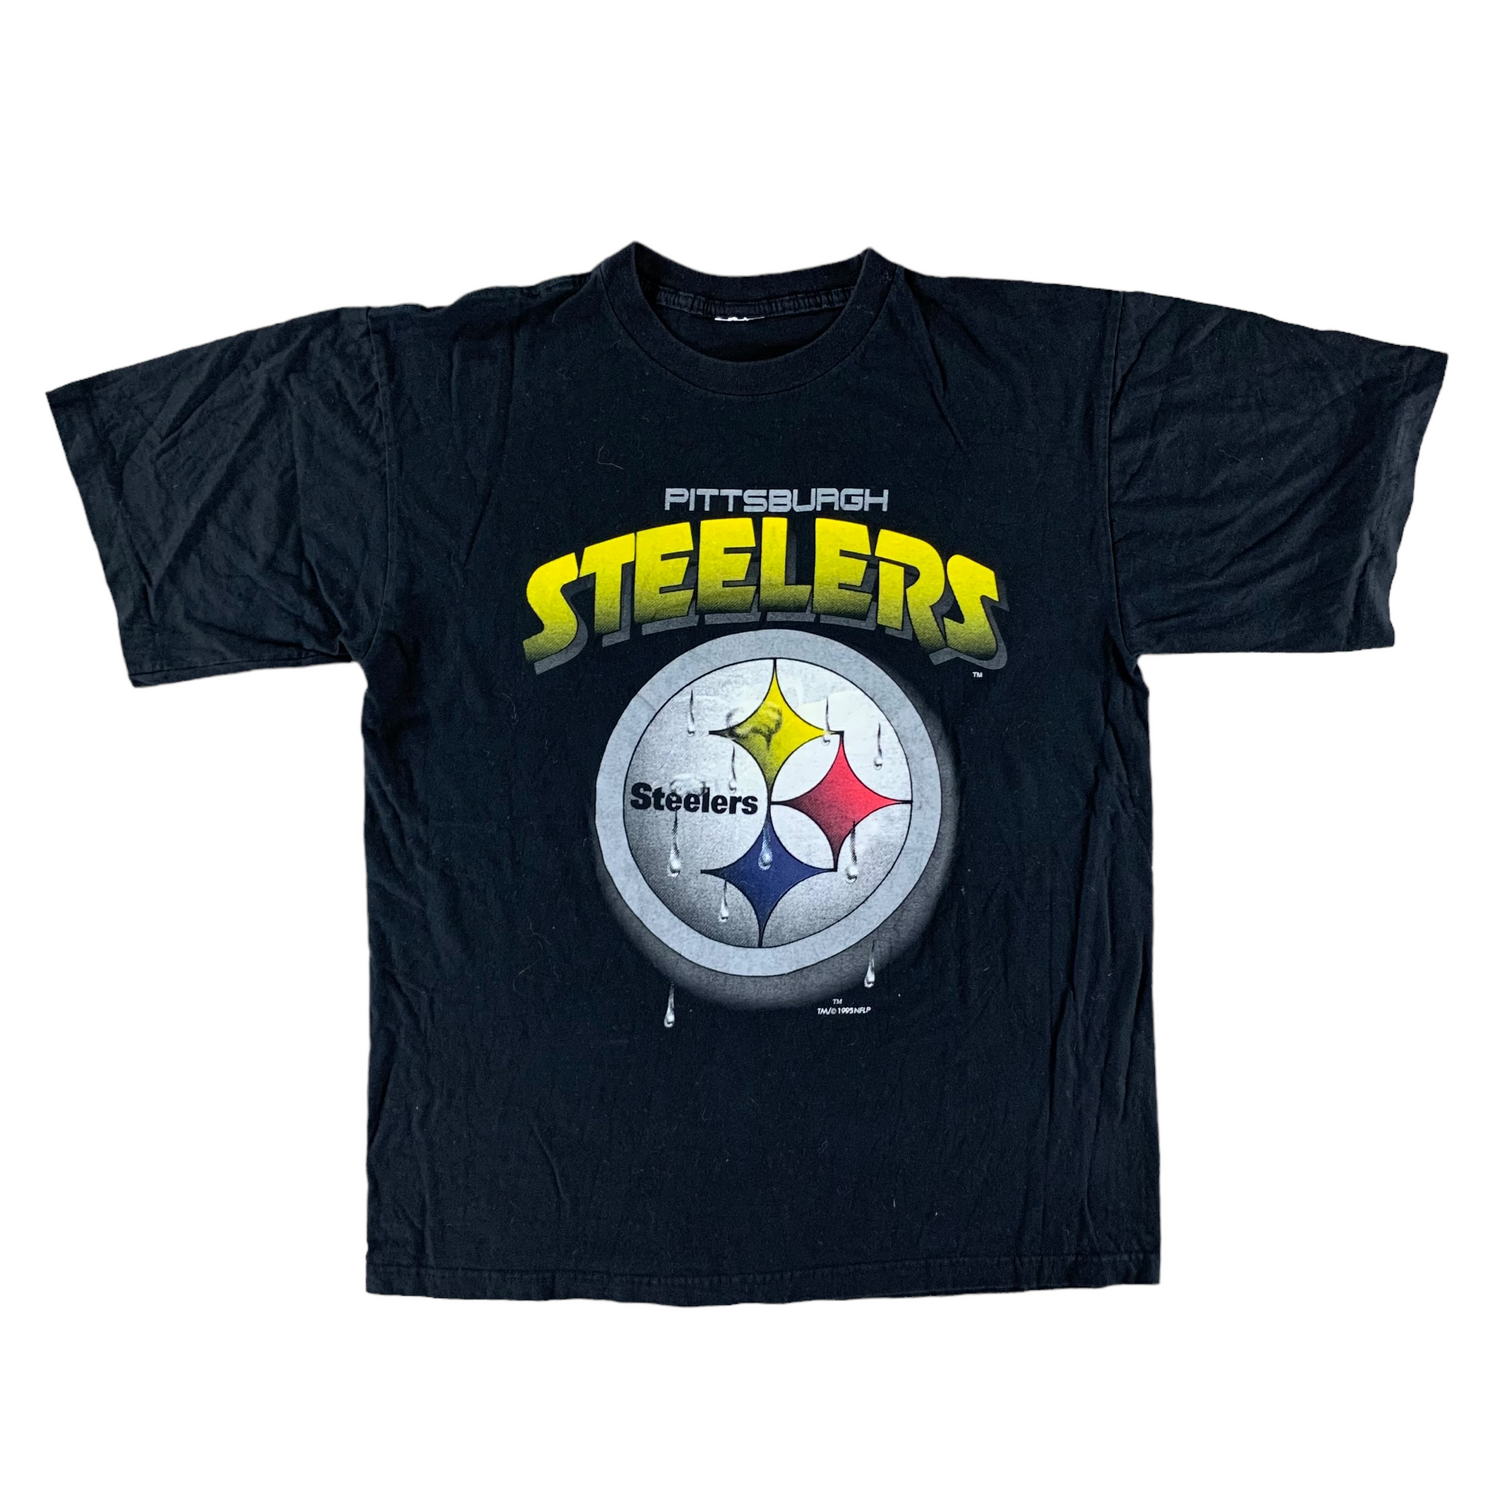 Vintage 1995 Pittsburgh Steelers T-shirt size XL